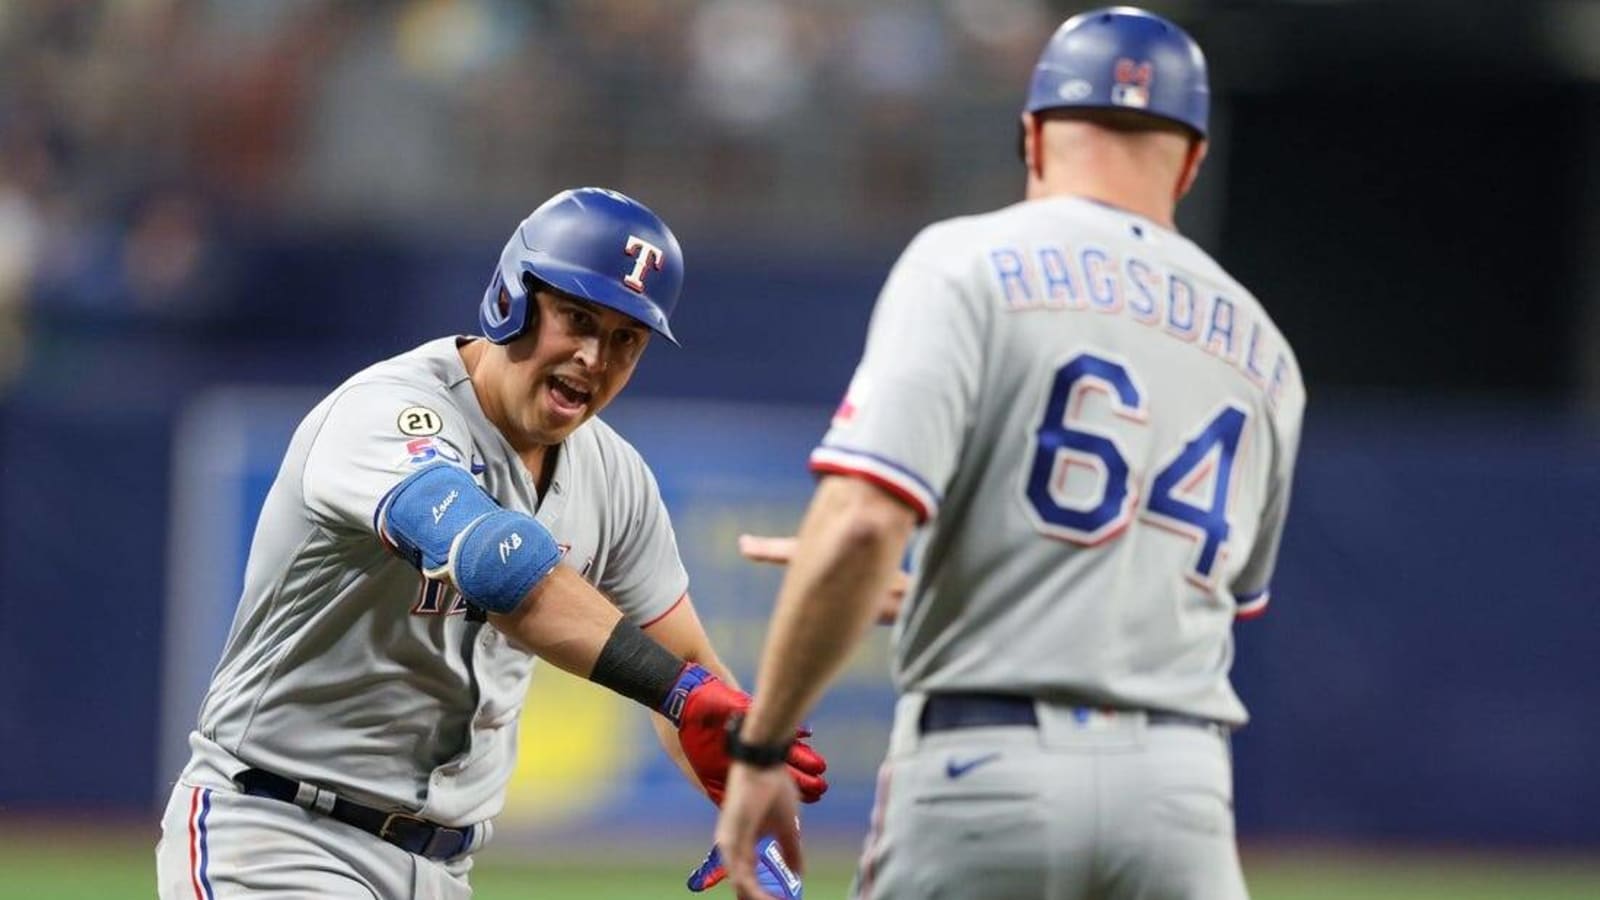 Nathaniel Lowe&#39;s HR lifts Rangers, stings Rays